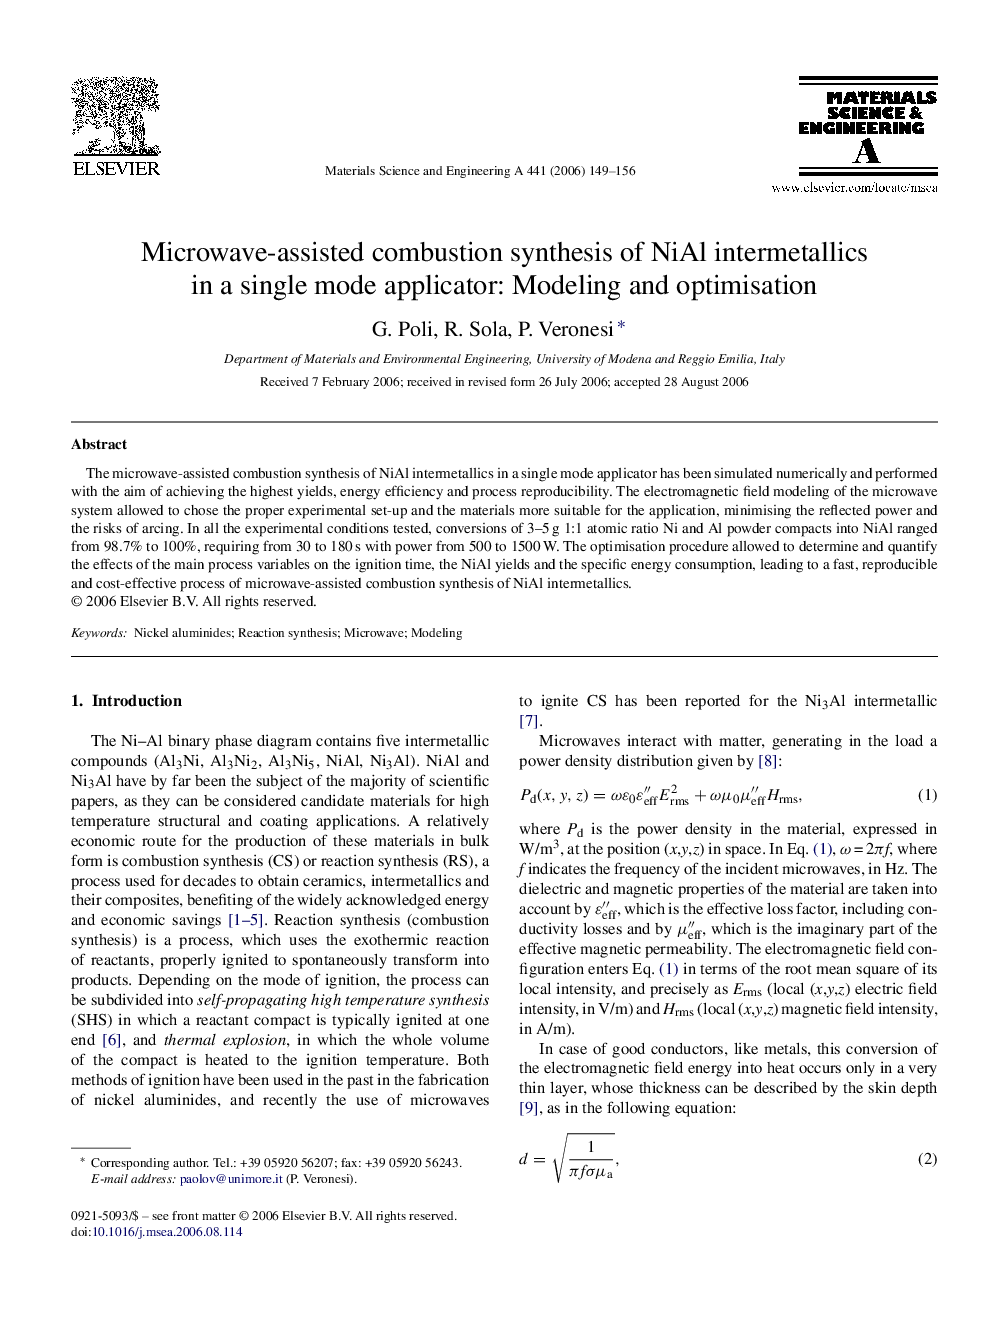 Microwave-assisted combustion synthesis of NiAl intermetallics in a single mode applicator: Modeling and optimisation